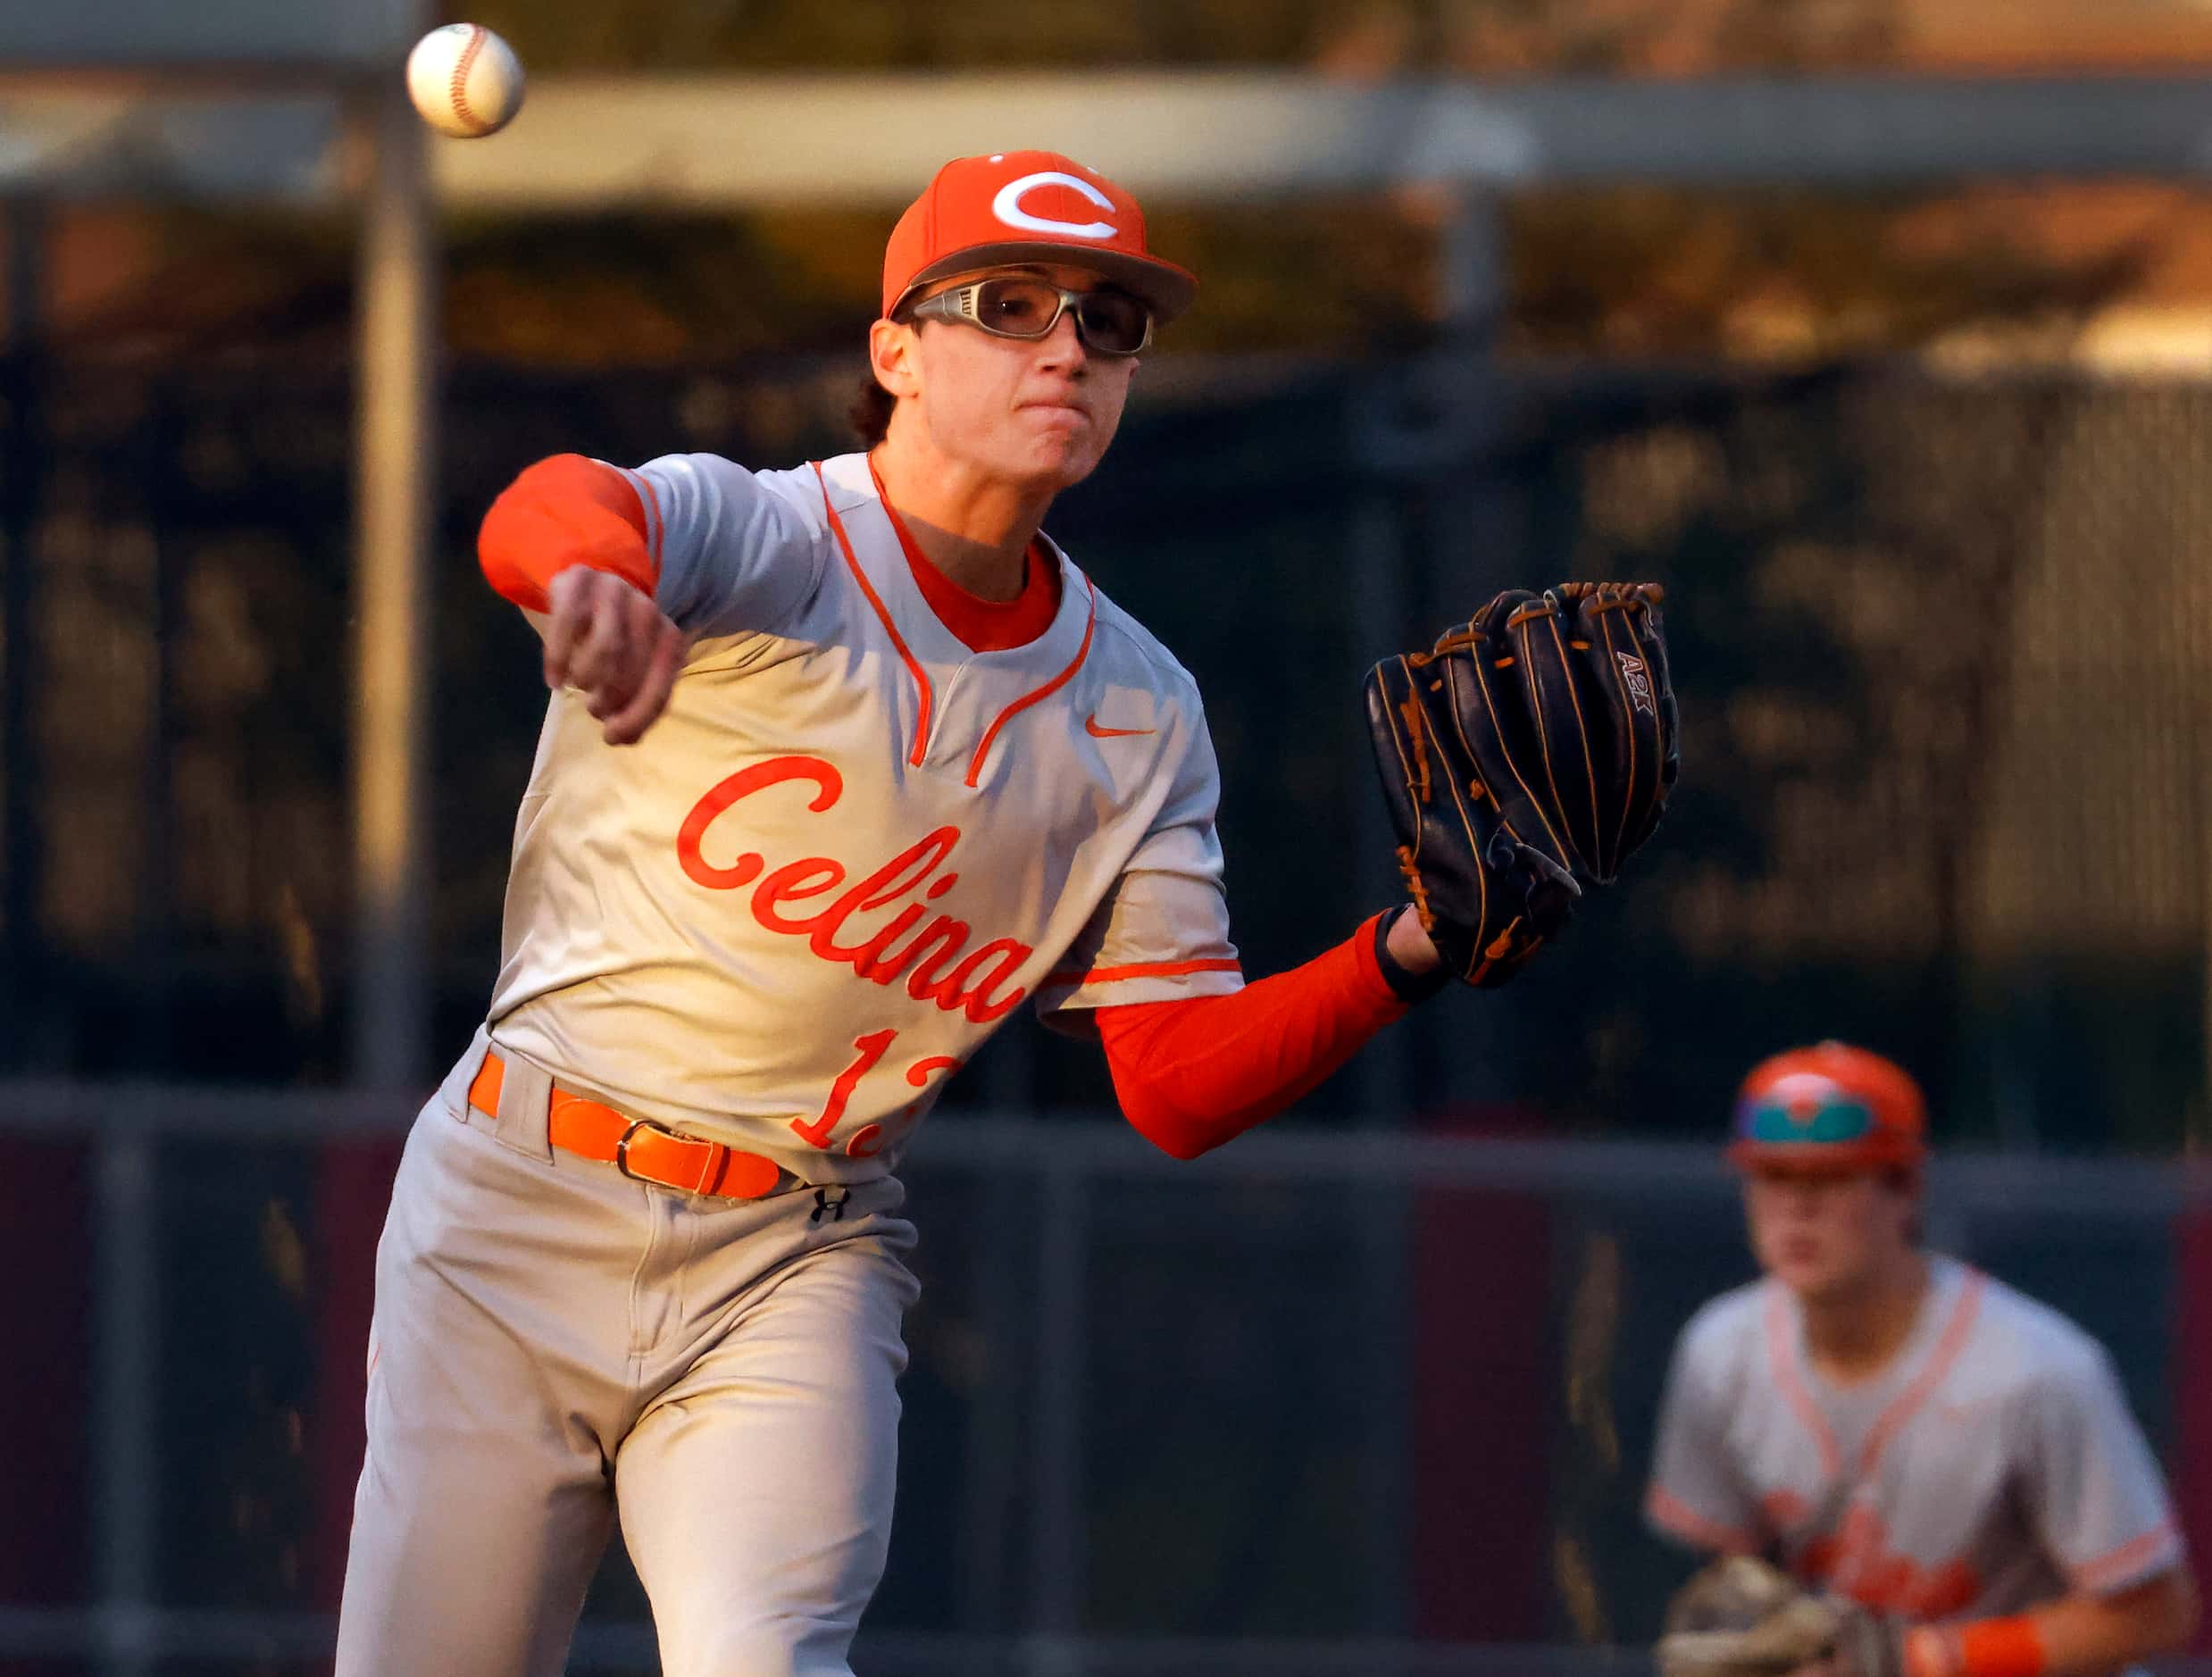 Celina High starting pitcher Brady Broeckel (13) wheels and throws to first on a third...